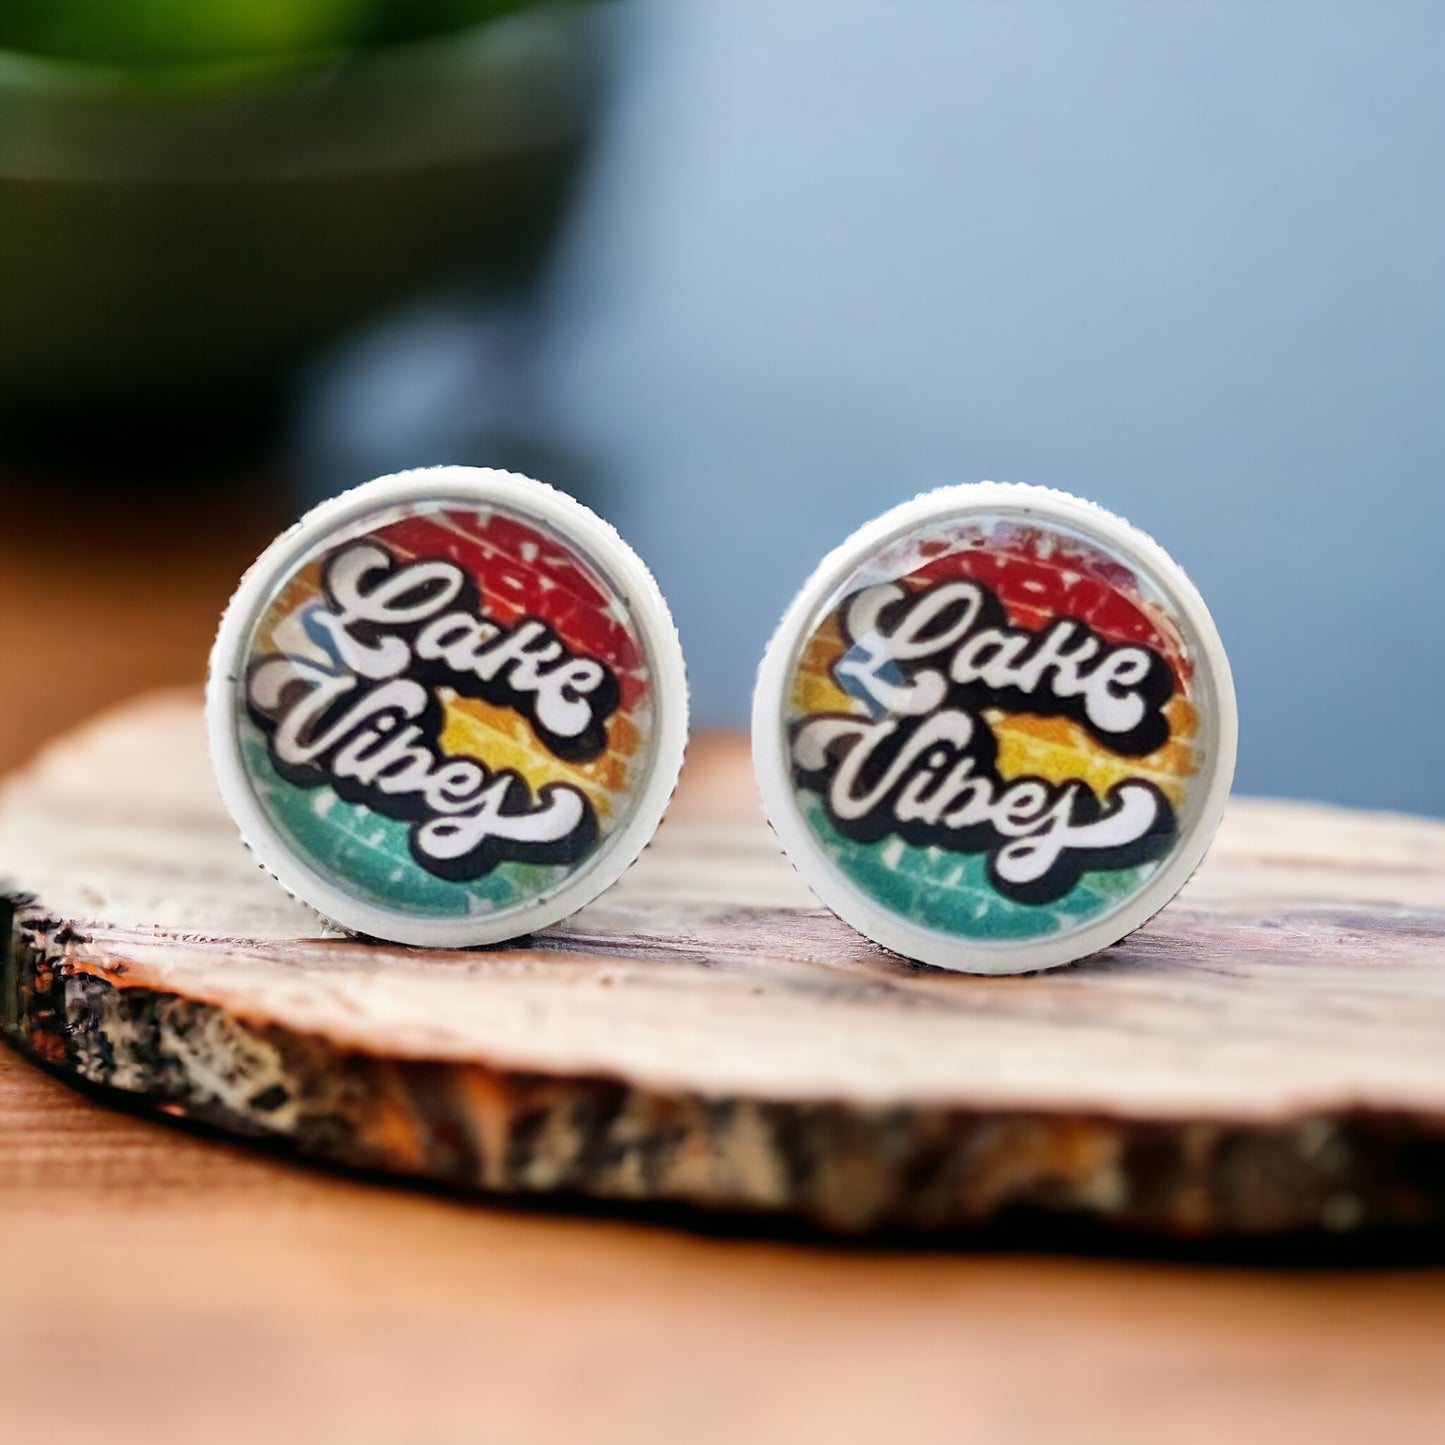 White Stud Earrings with 'Lake Vibes' - Stylish & Vibrant Accessories